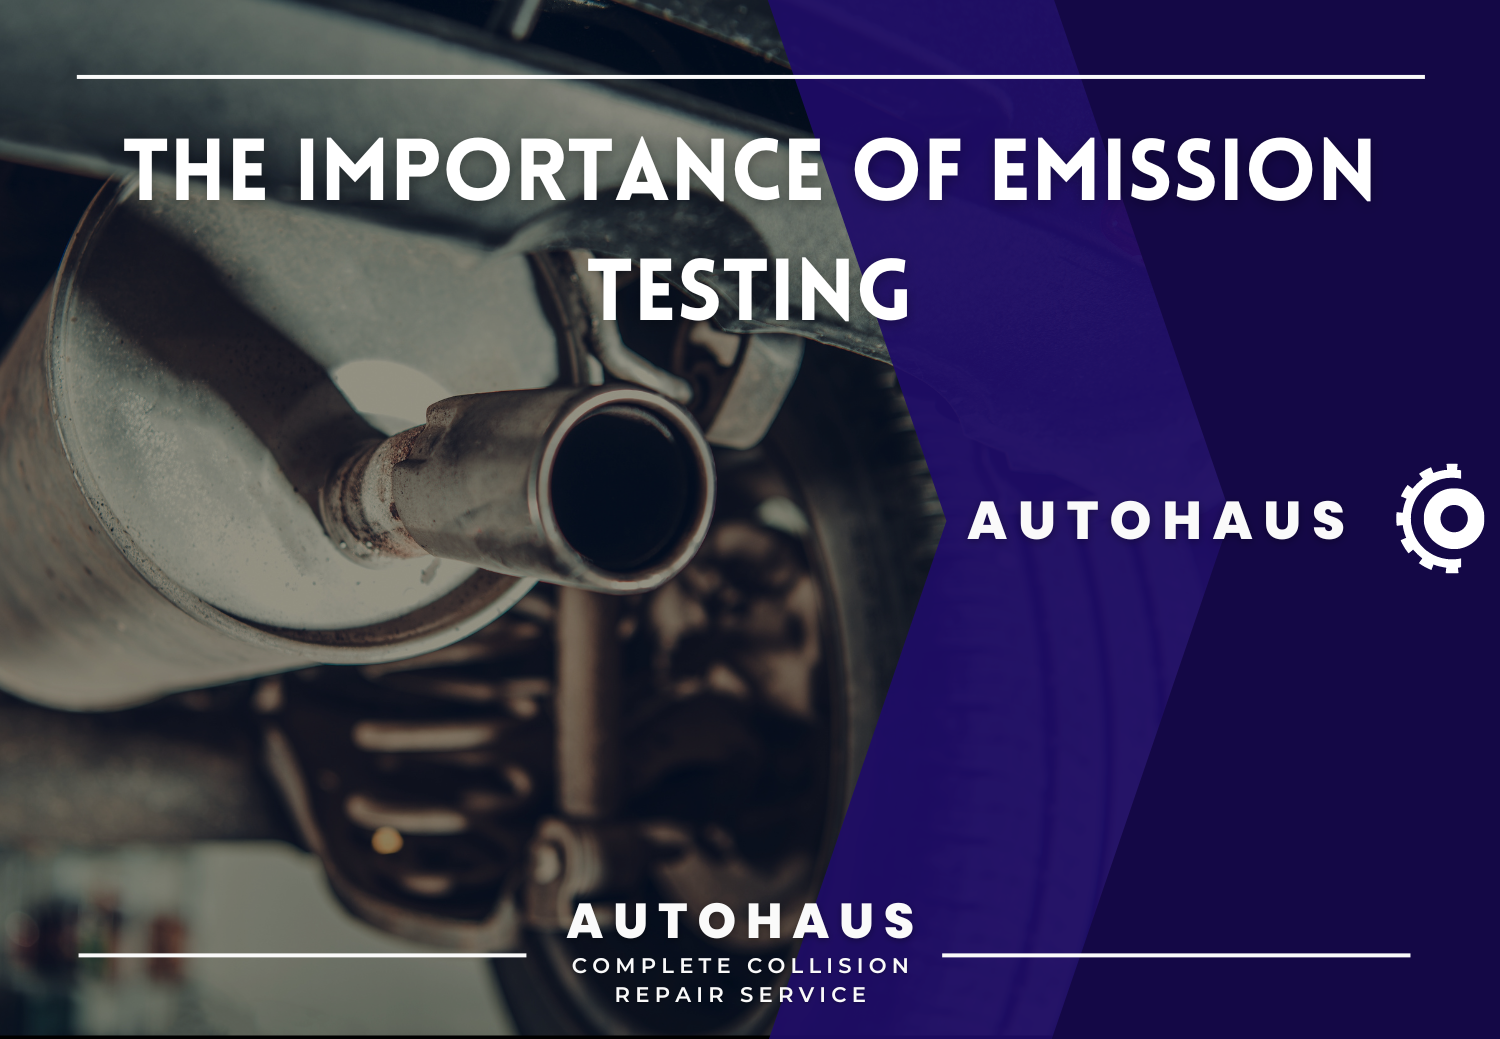 The Importance of Emission Testing